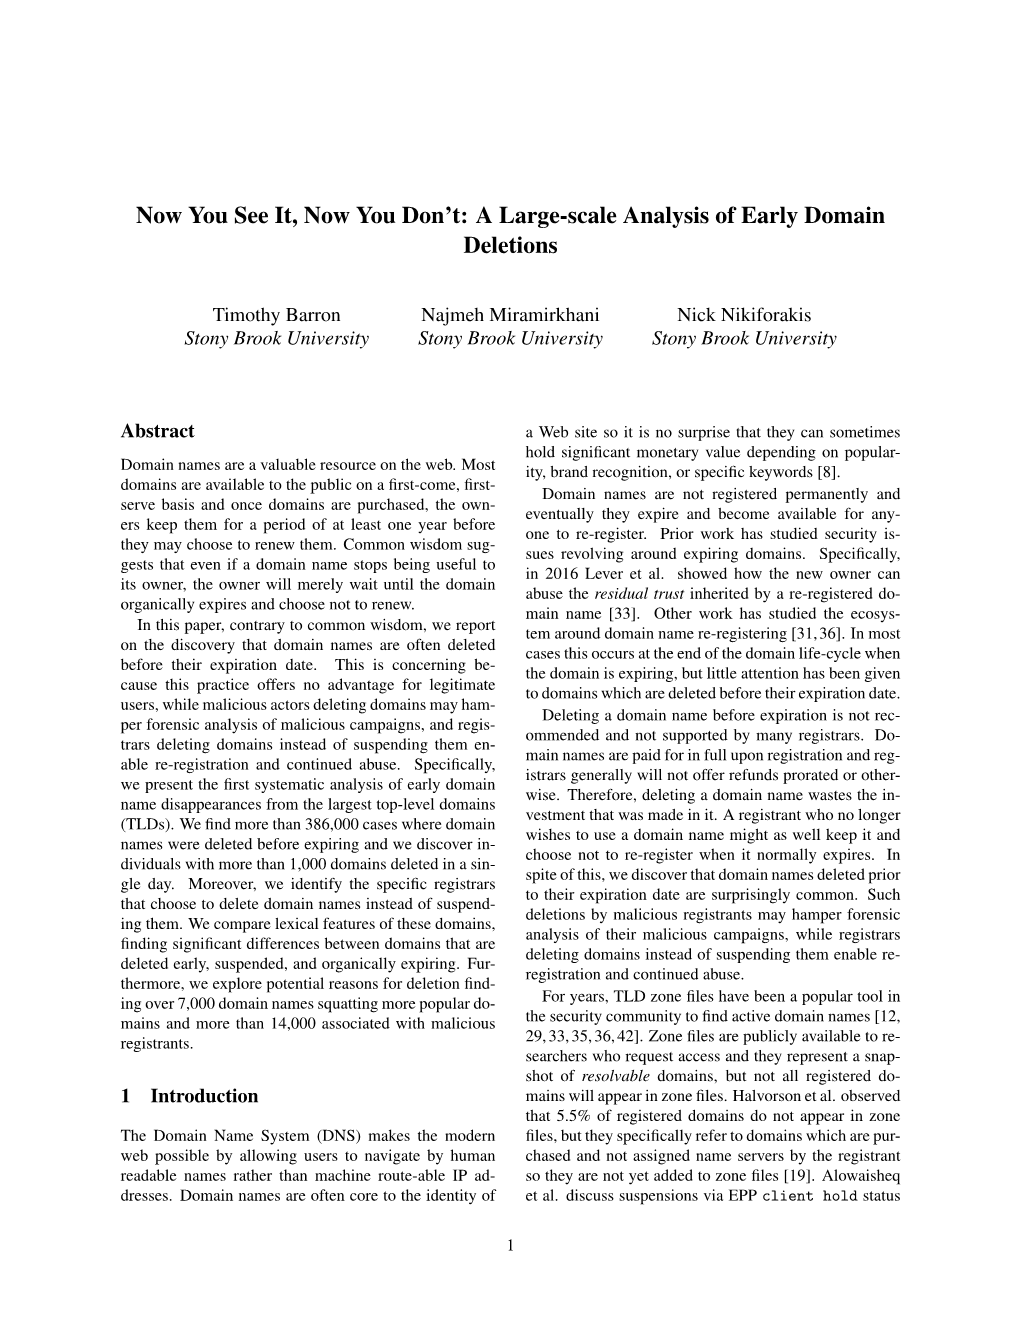 A Large-Scale Analysis of Early Domain Deletions